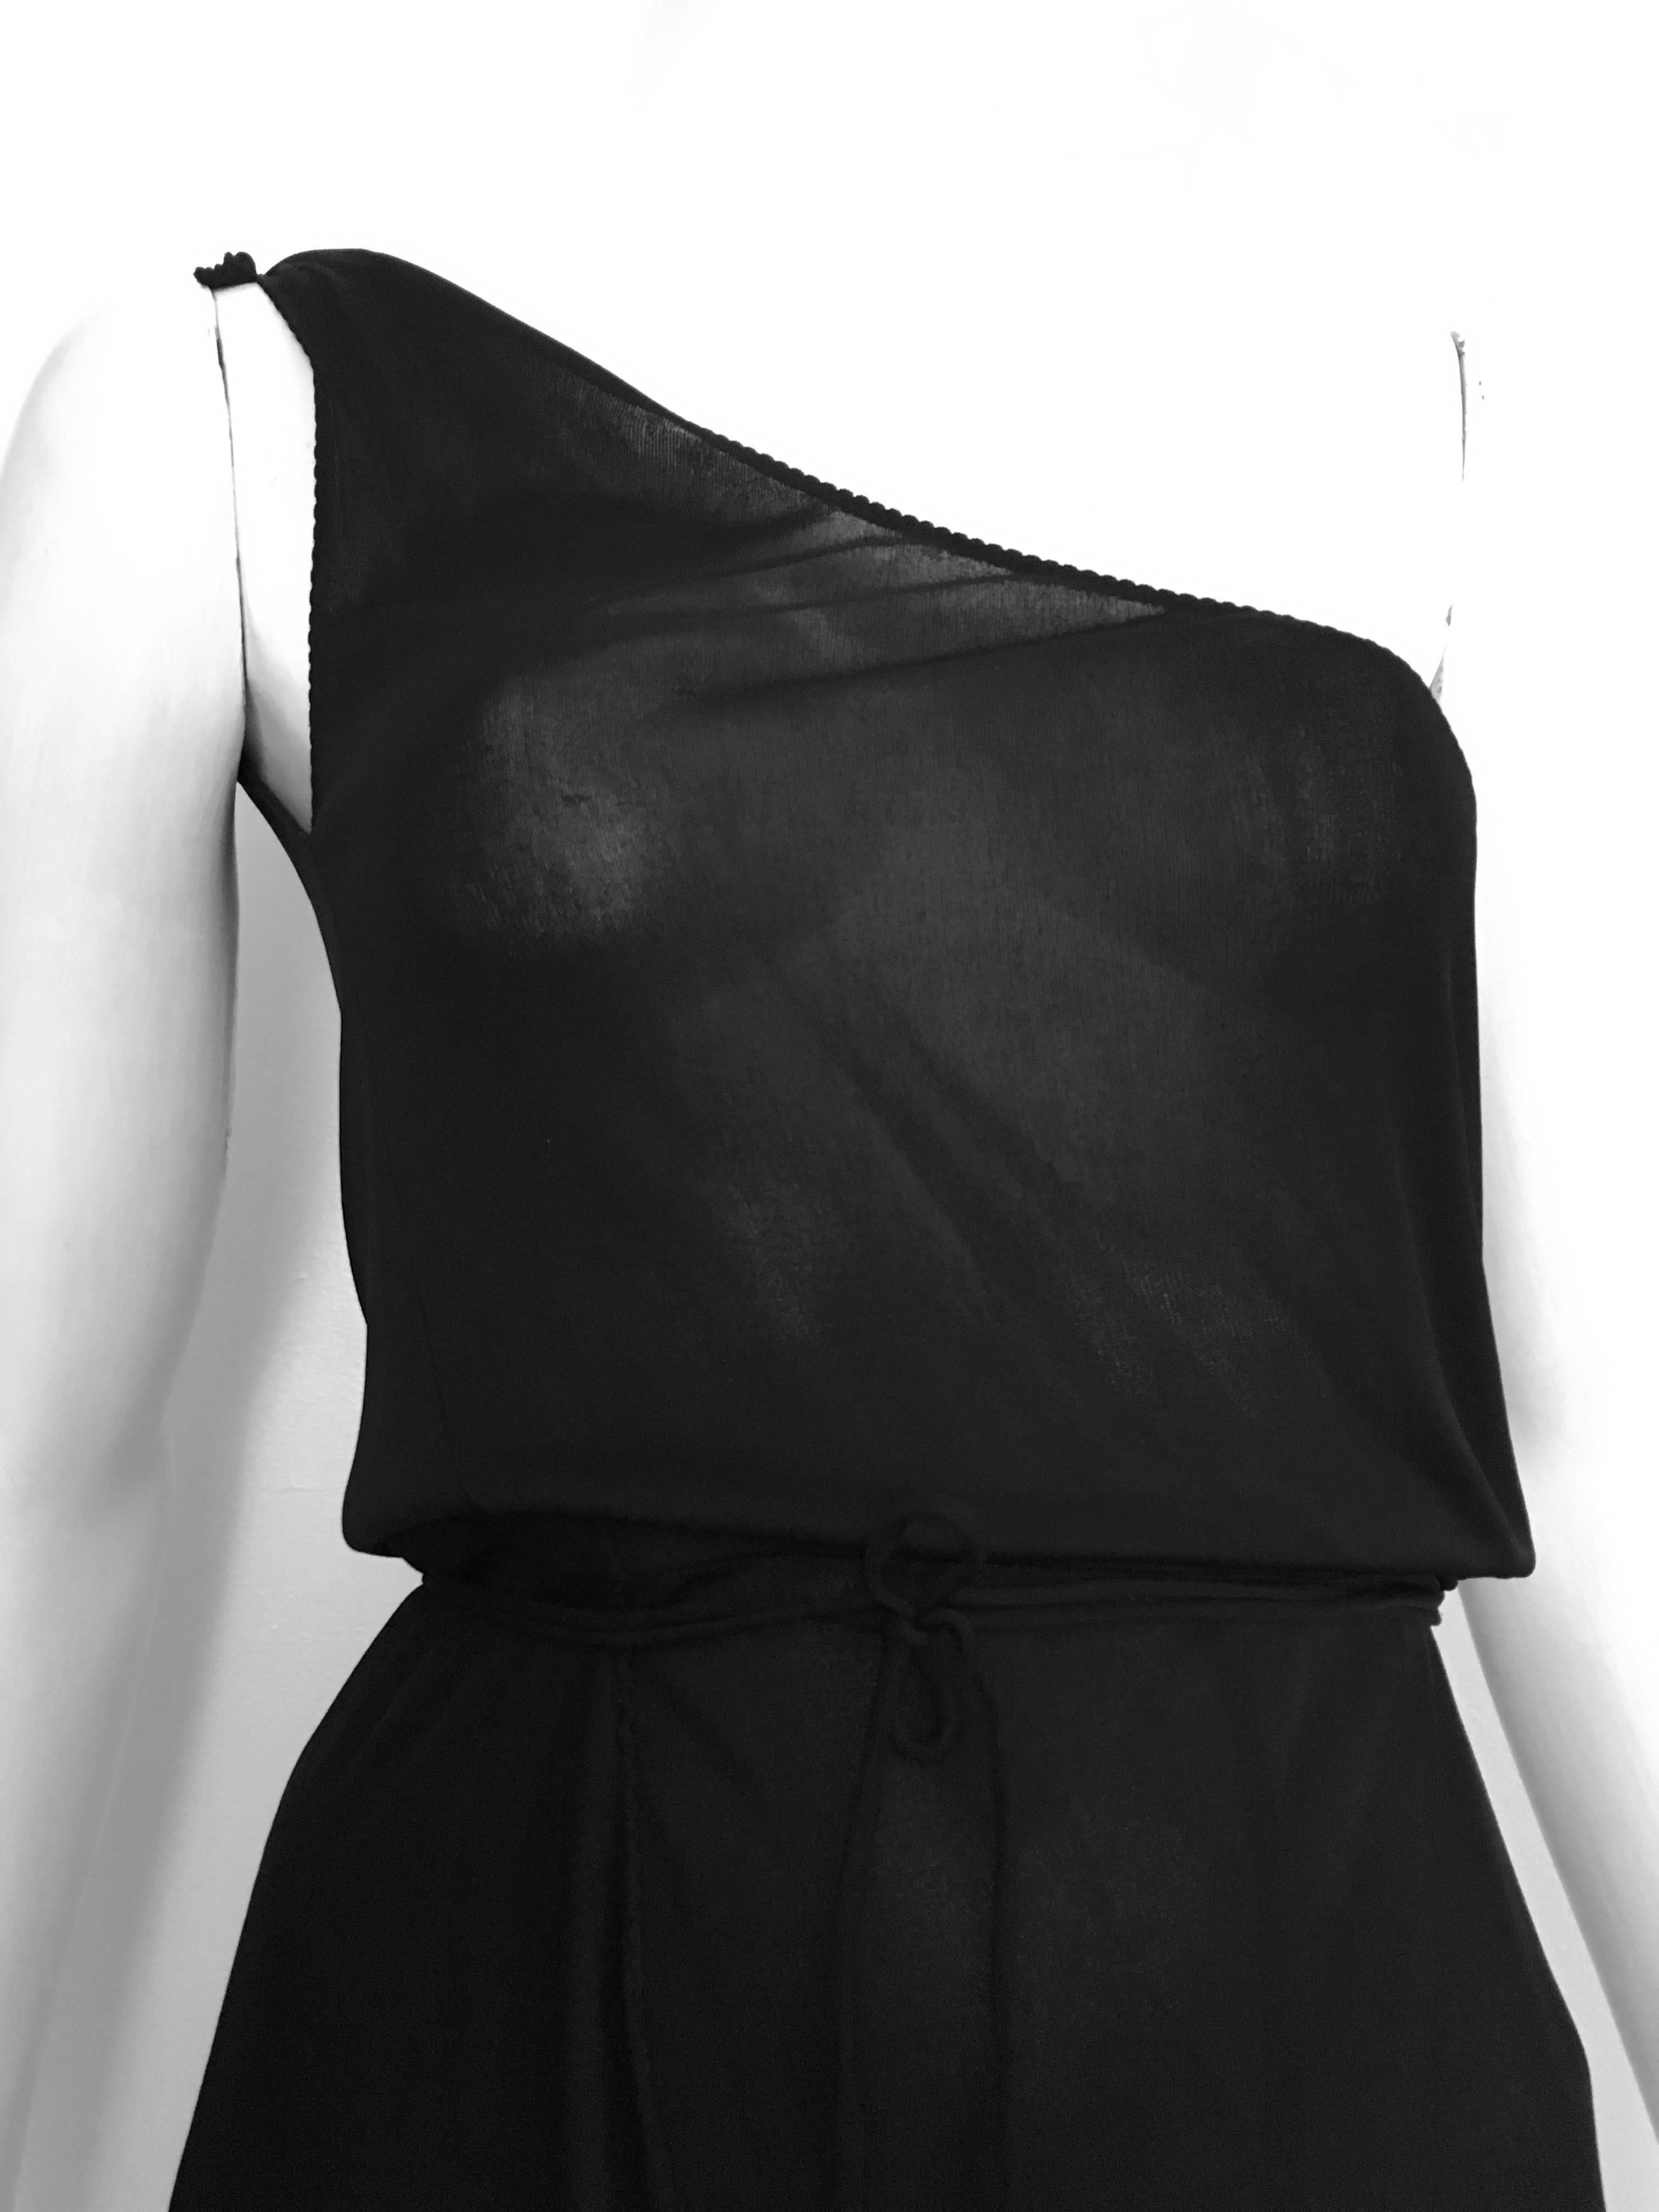 Stephen Burrows for Henri Bendel 1970s sheer black jersey one shoulder asymmetrical bottom dress is a size 4/6.  
If you have a body like this mannequin then it will fit you perfectly.  
Because this dress is sheer you will need to wear strapless